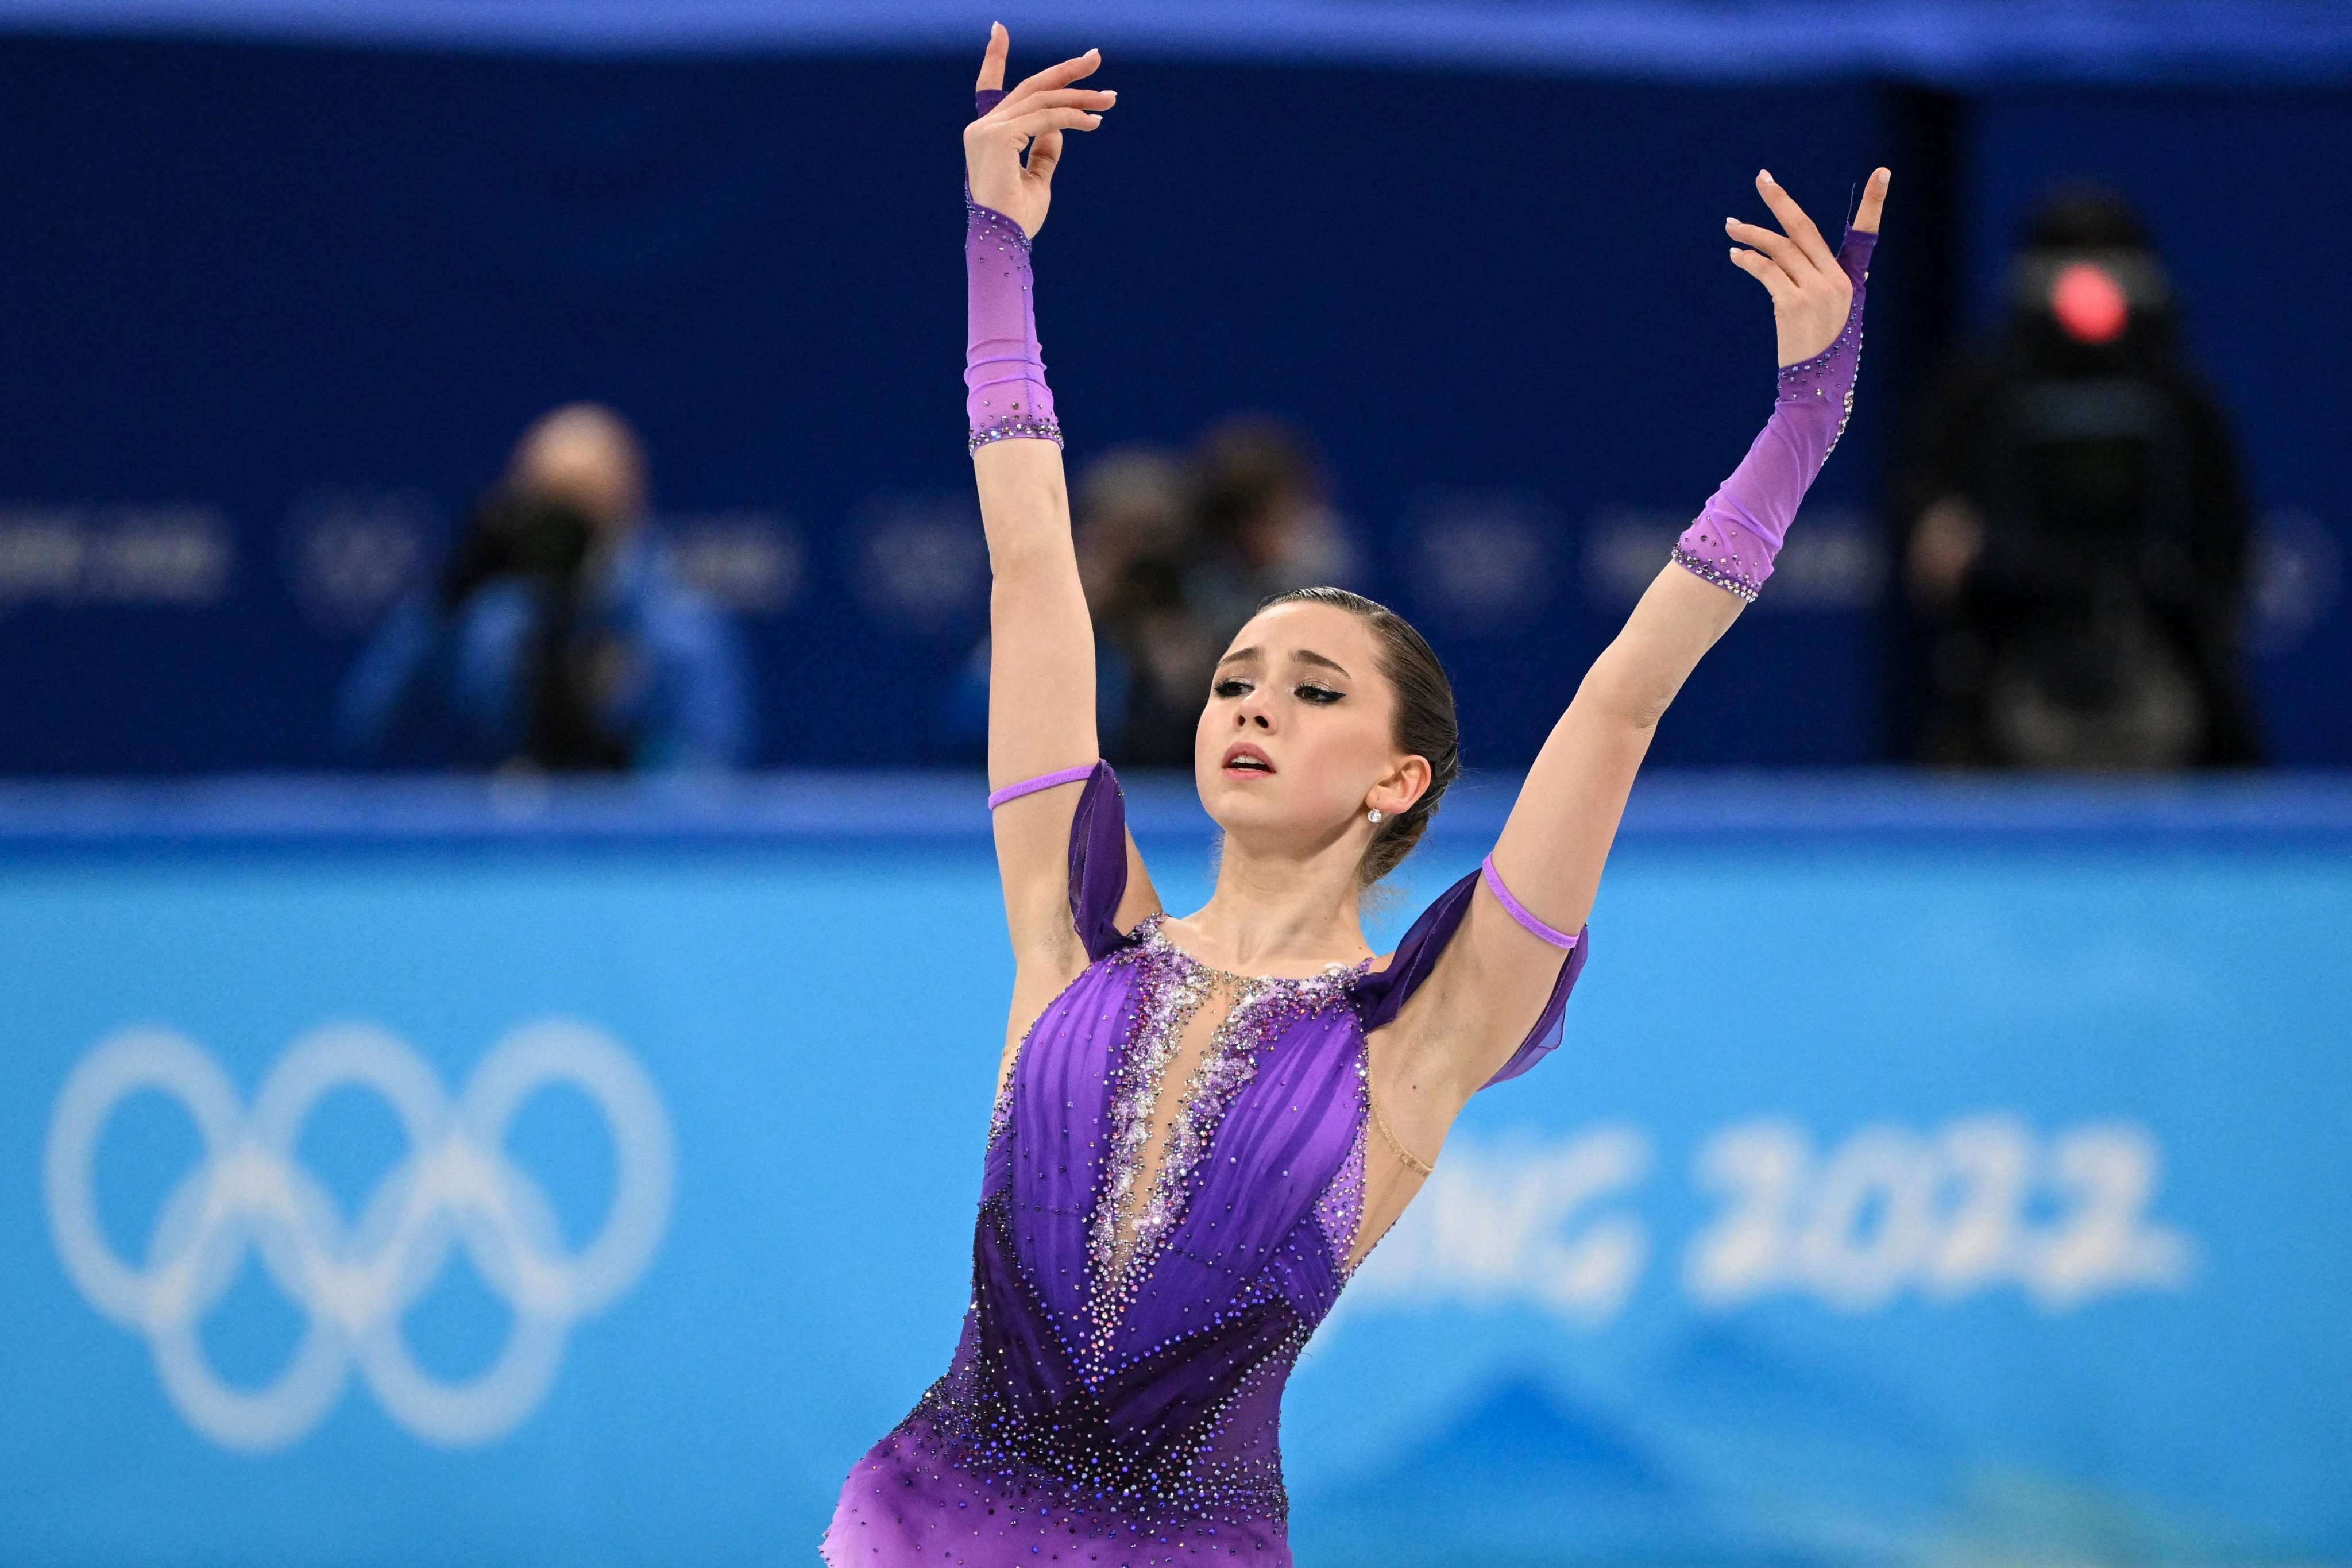 Russia’s Kamila Valieva competes in the women’s single skating short programme of the figure skating event during the Beijing 2022 Winter Olympic Games. Photo: AFP